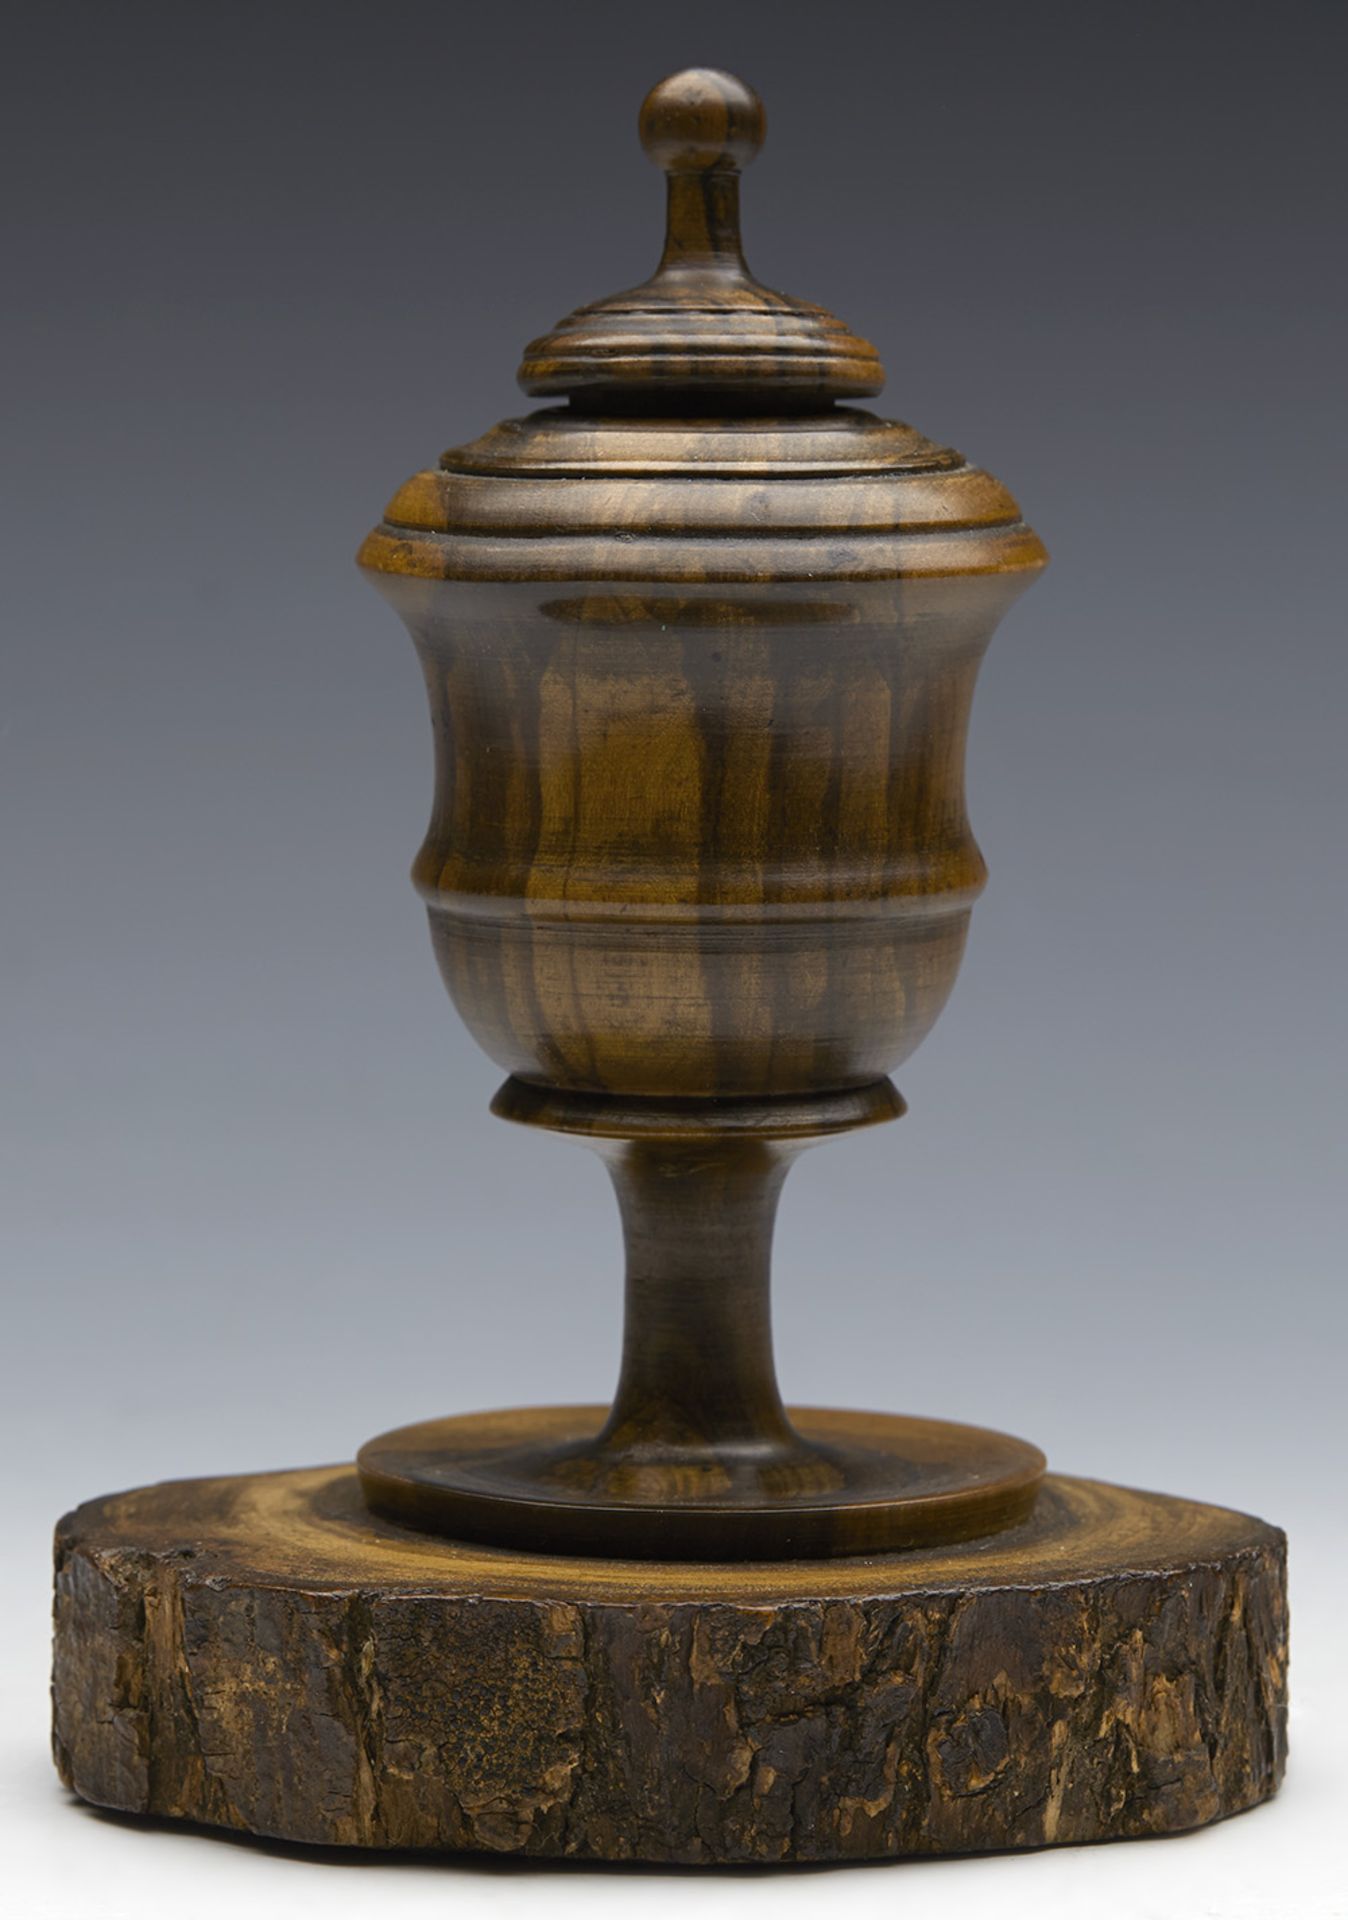 ANTIQUE FINELY HAND TURNED TREEN INKWELL 19TH C.